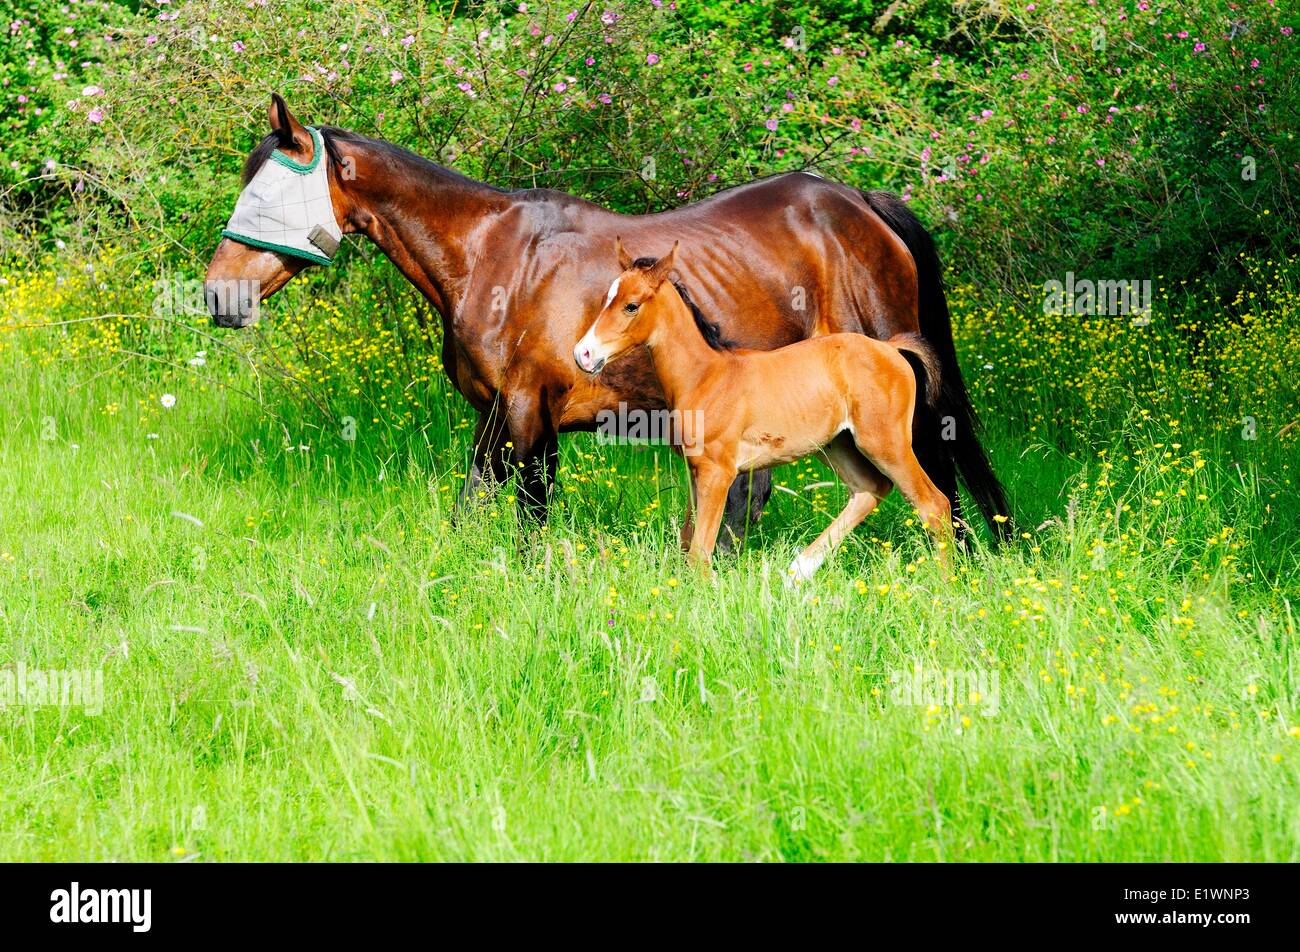 A two week old foal trots beside her mother.  The foal is 1/2 Standard and 1/2 Quarter horse. Stock Photo